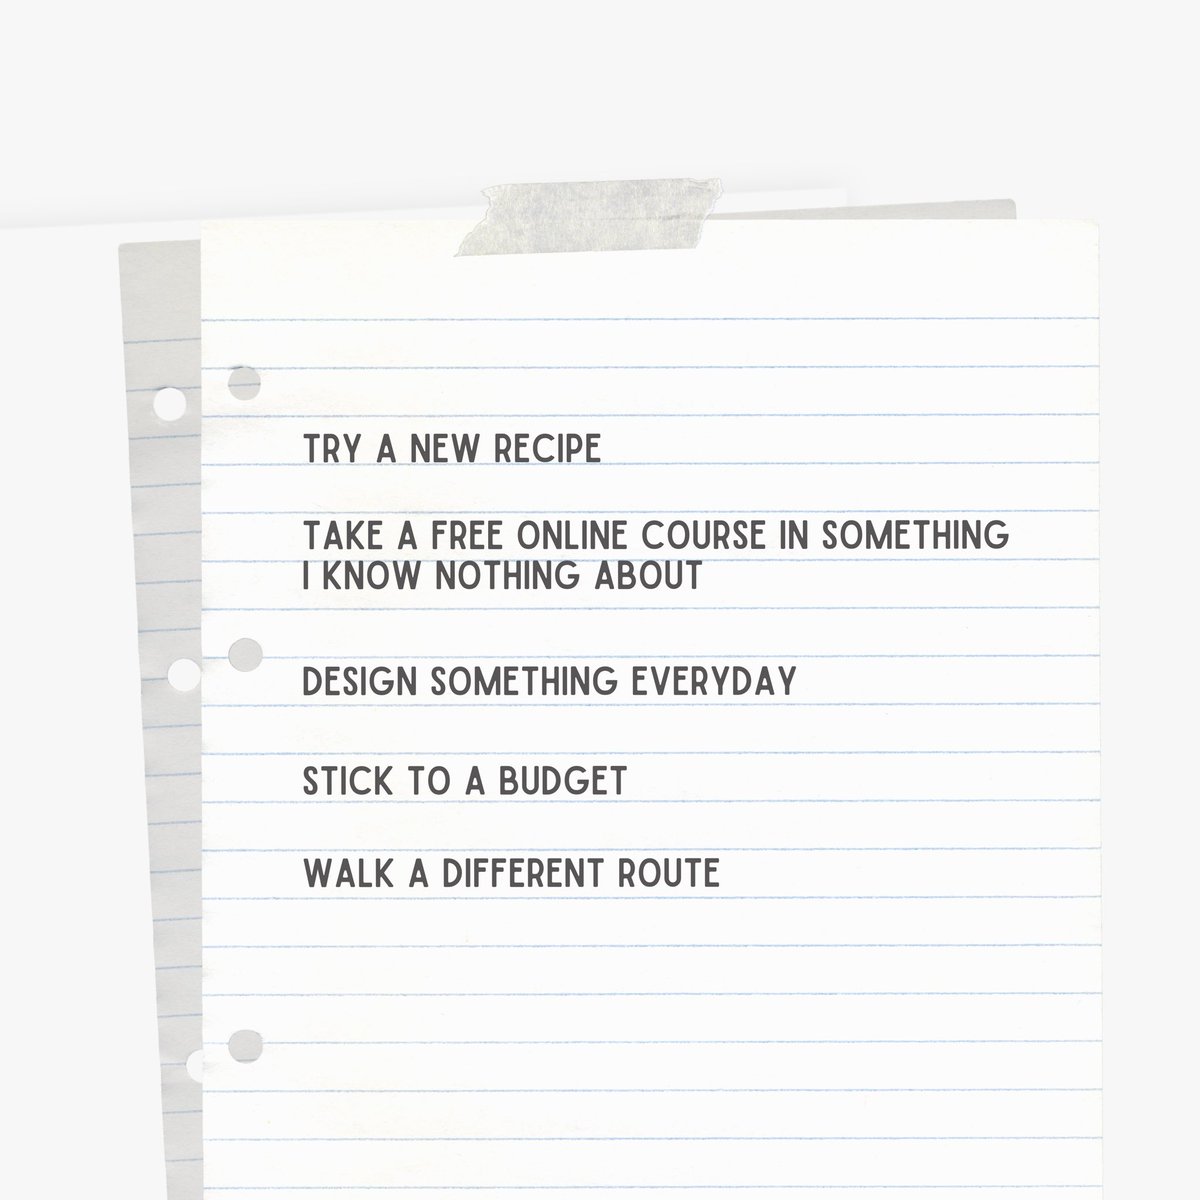 New Ways November - Day 1: Make a list of new things you want to do this month actionforhappiness.org/november #NewWaysNovember